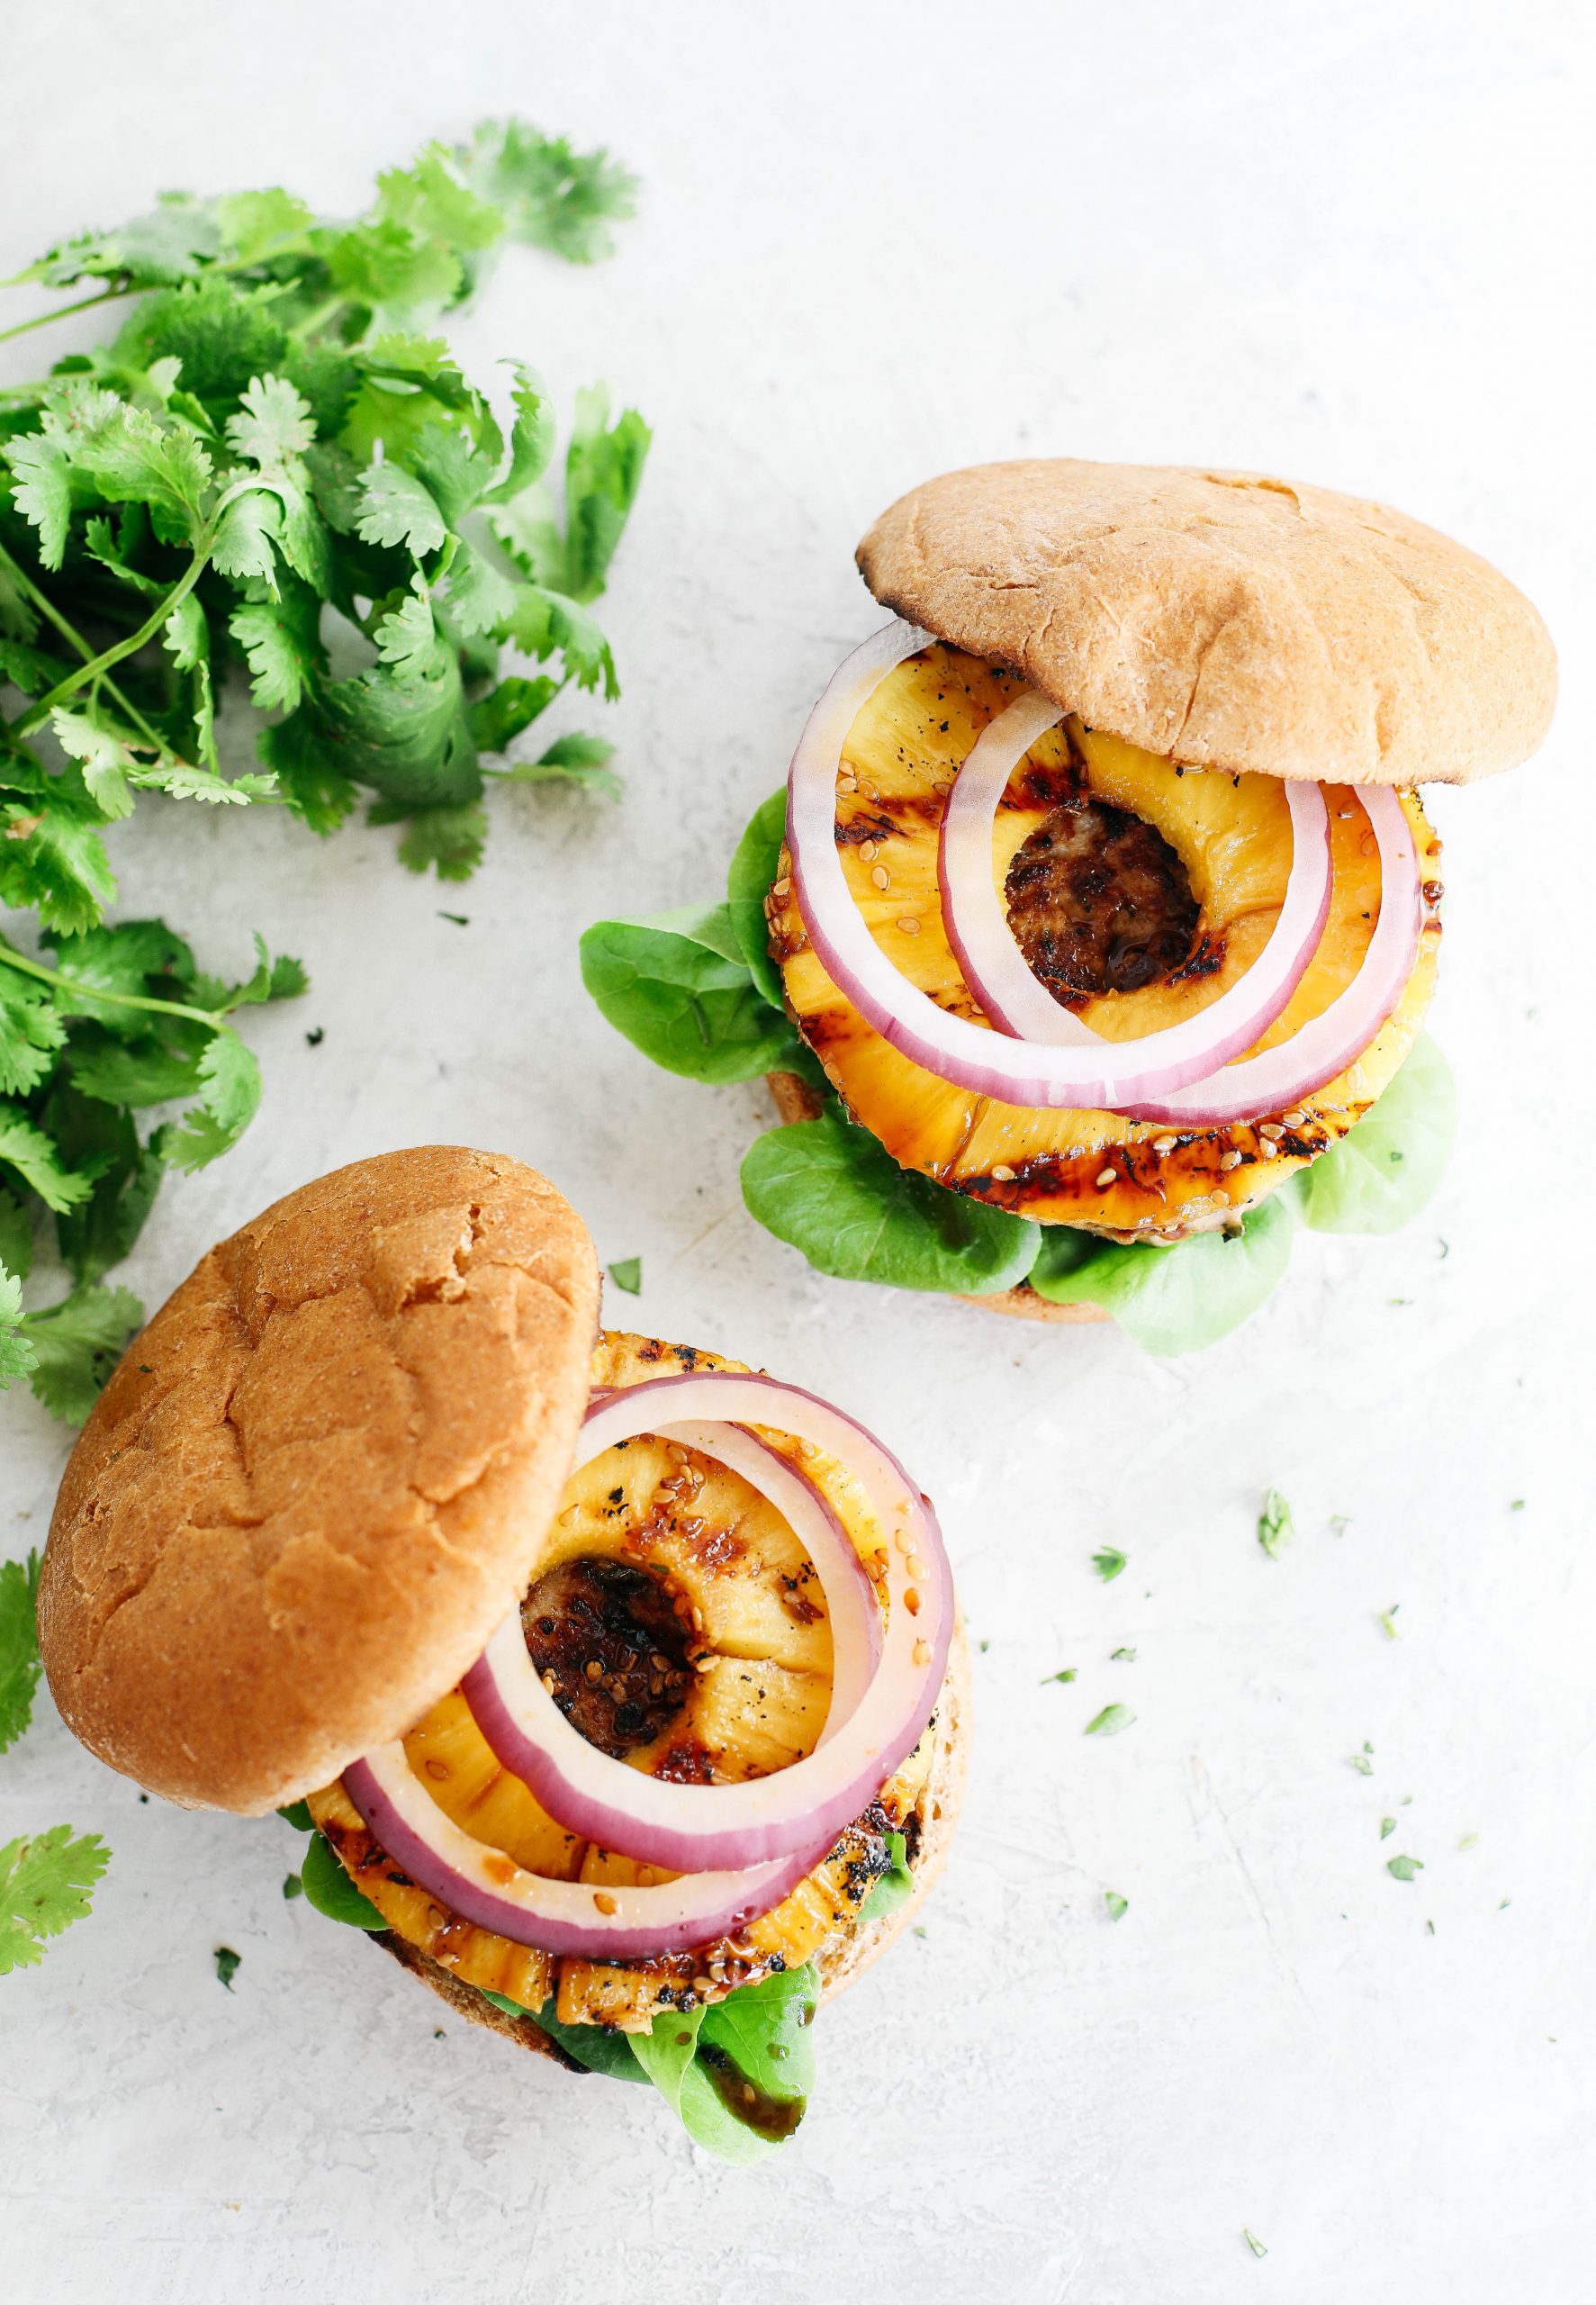 These delicious Hawaiian Turkey Burgers are packed with tons of flavor, made with a healthy homemade teriyaki sauce and topped with fresh grilled pineapple!